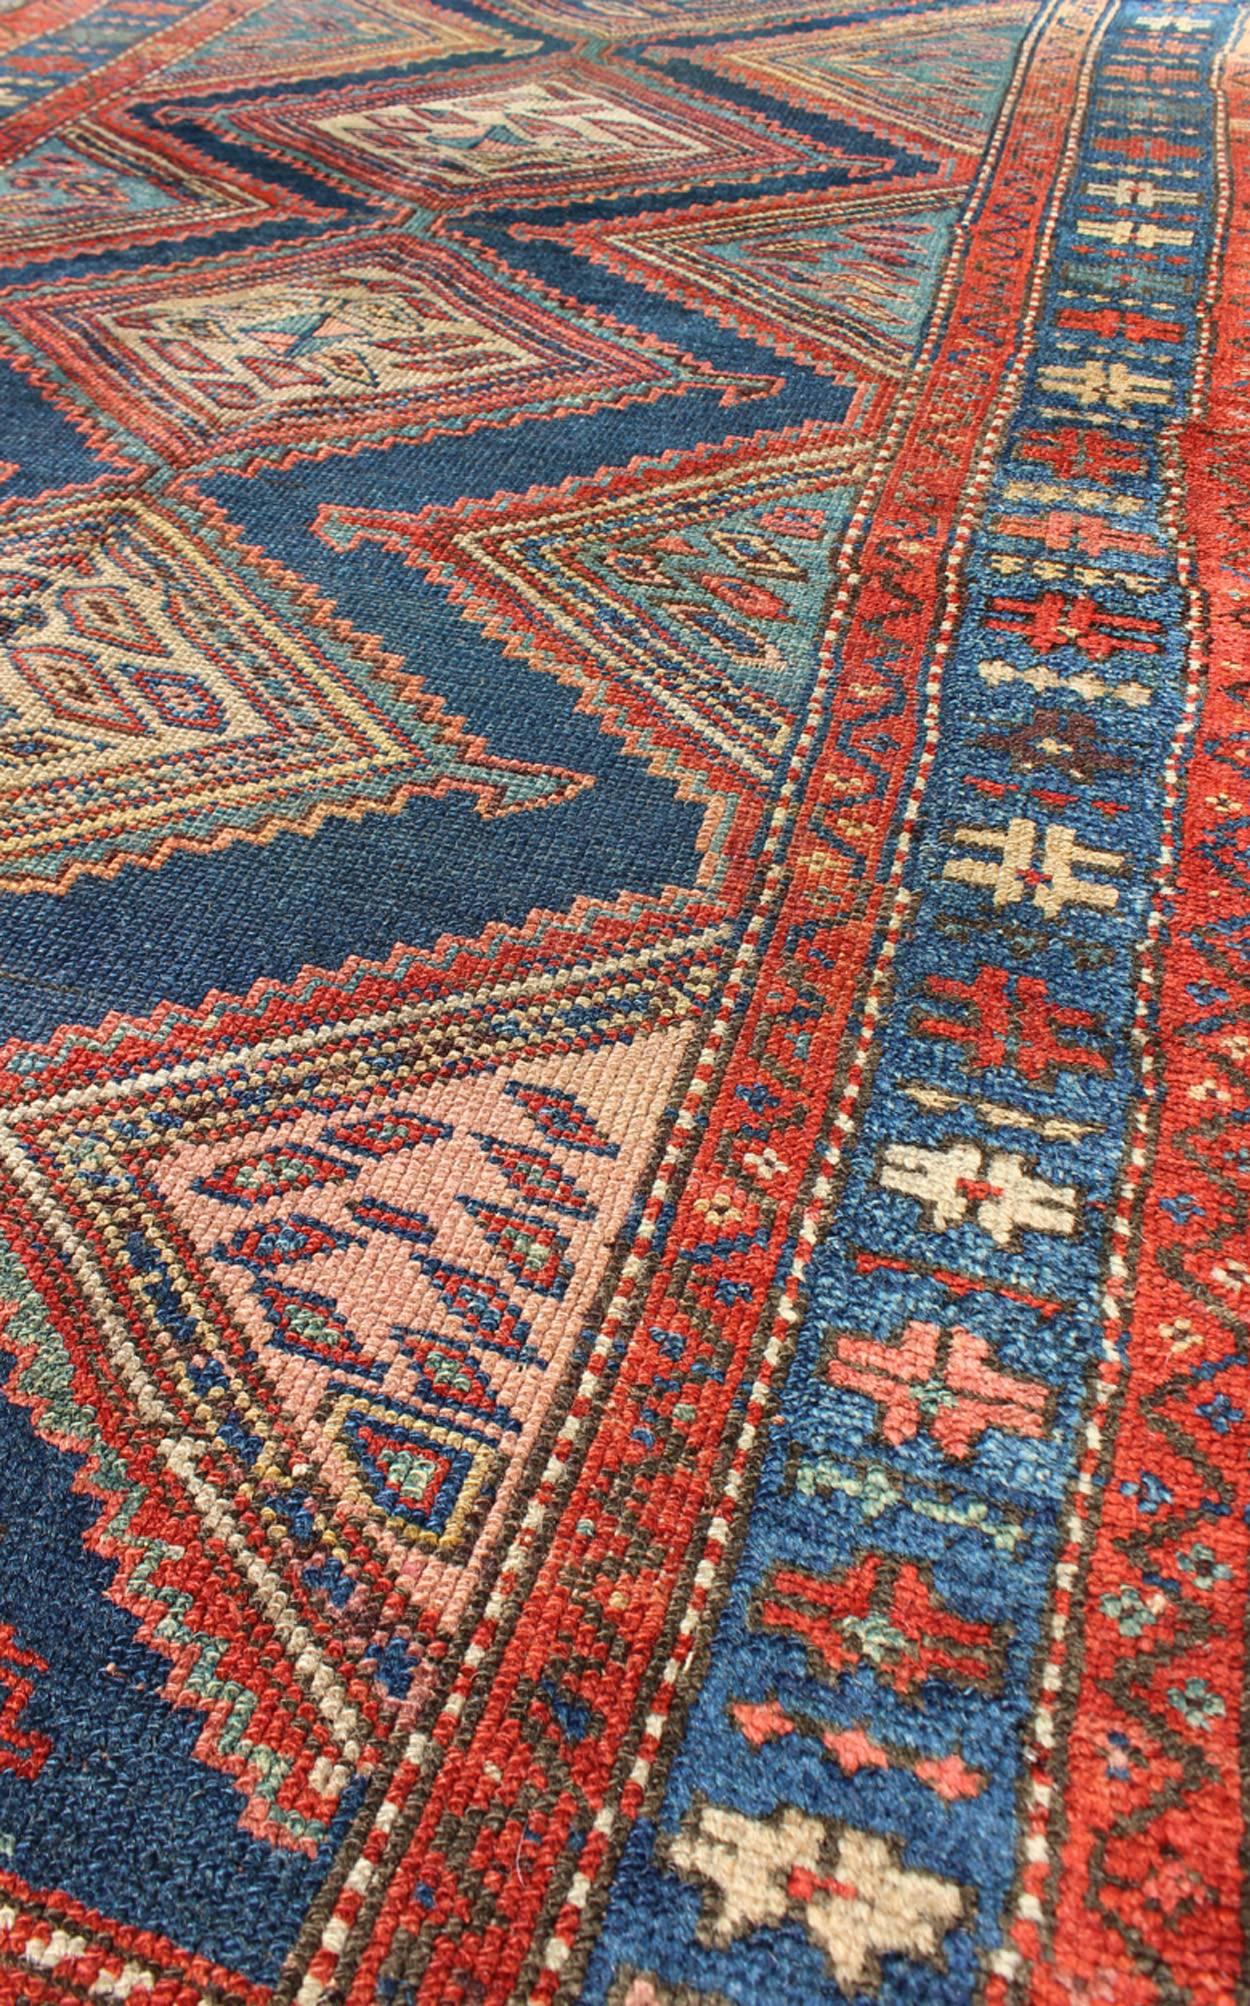 Early 20th Century Antique N.W. Persian Malayer Tribal Rug with Diamond Design